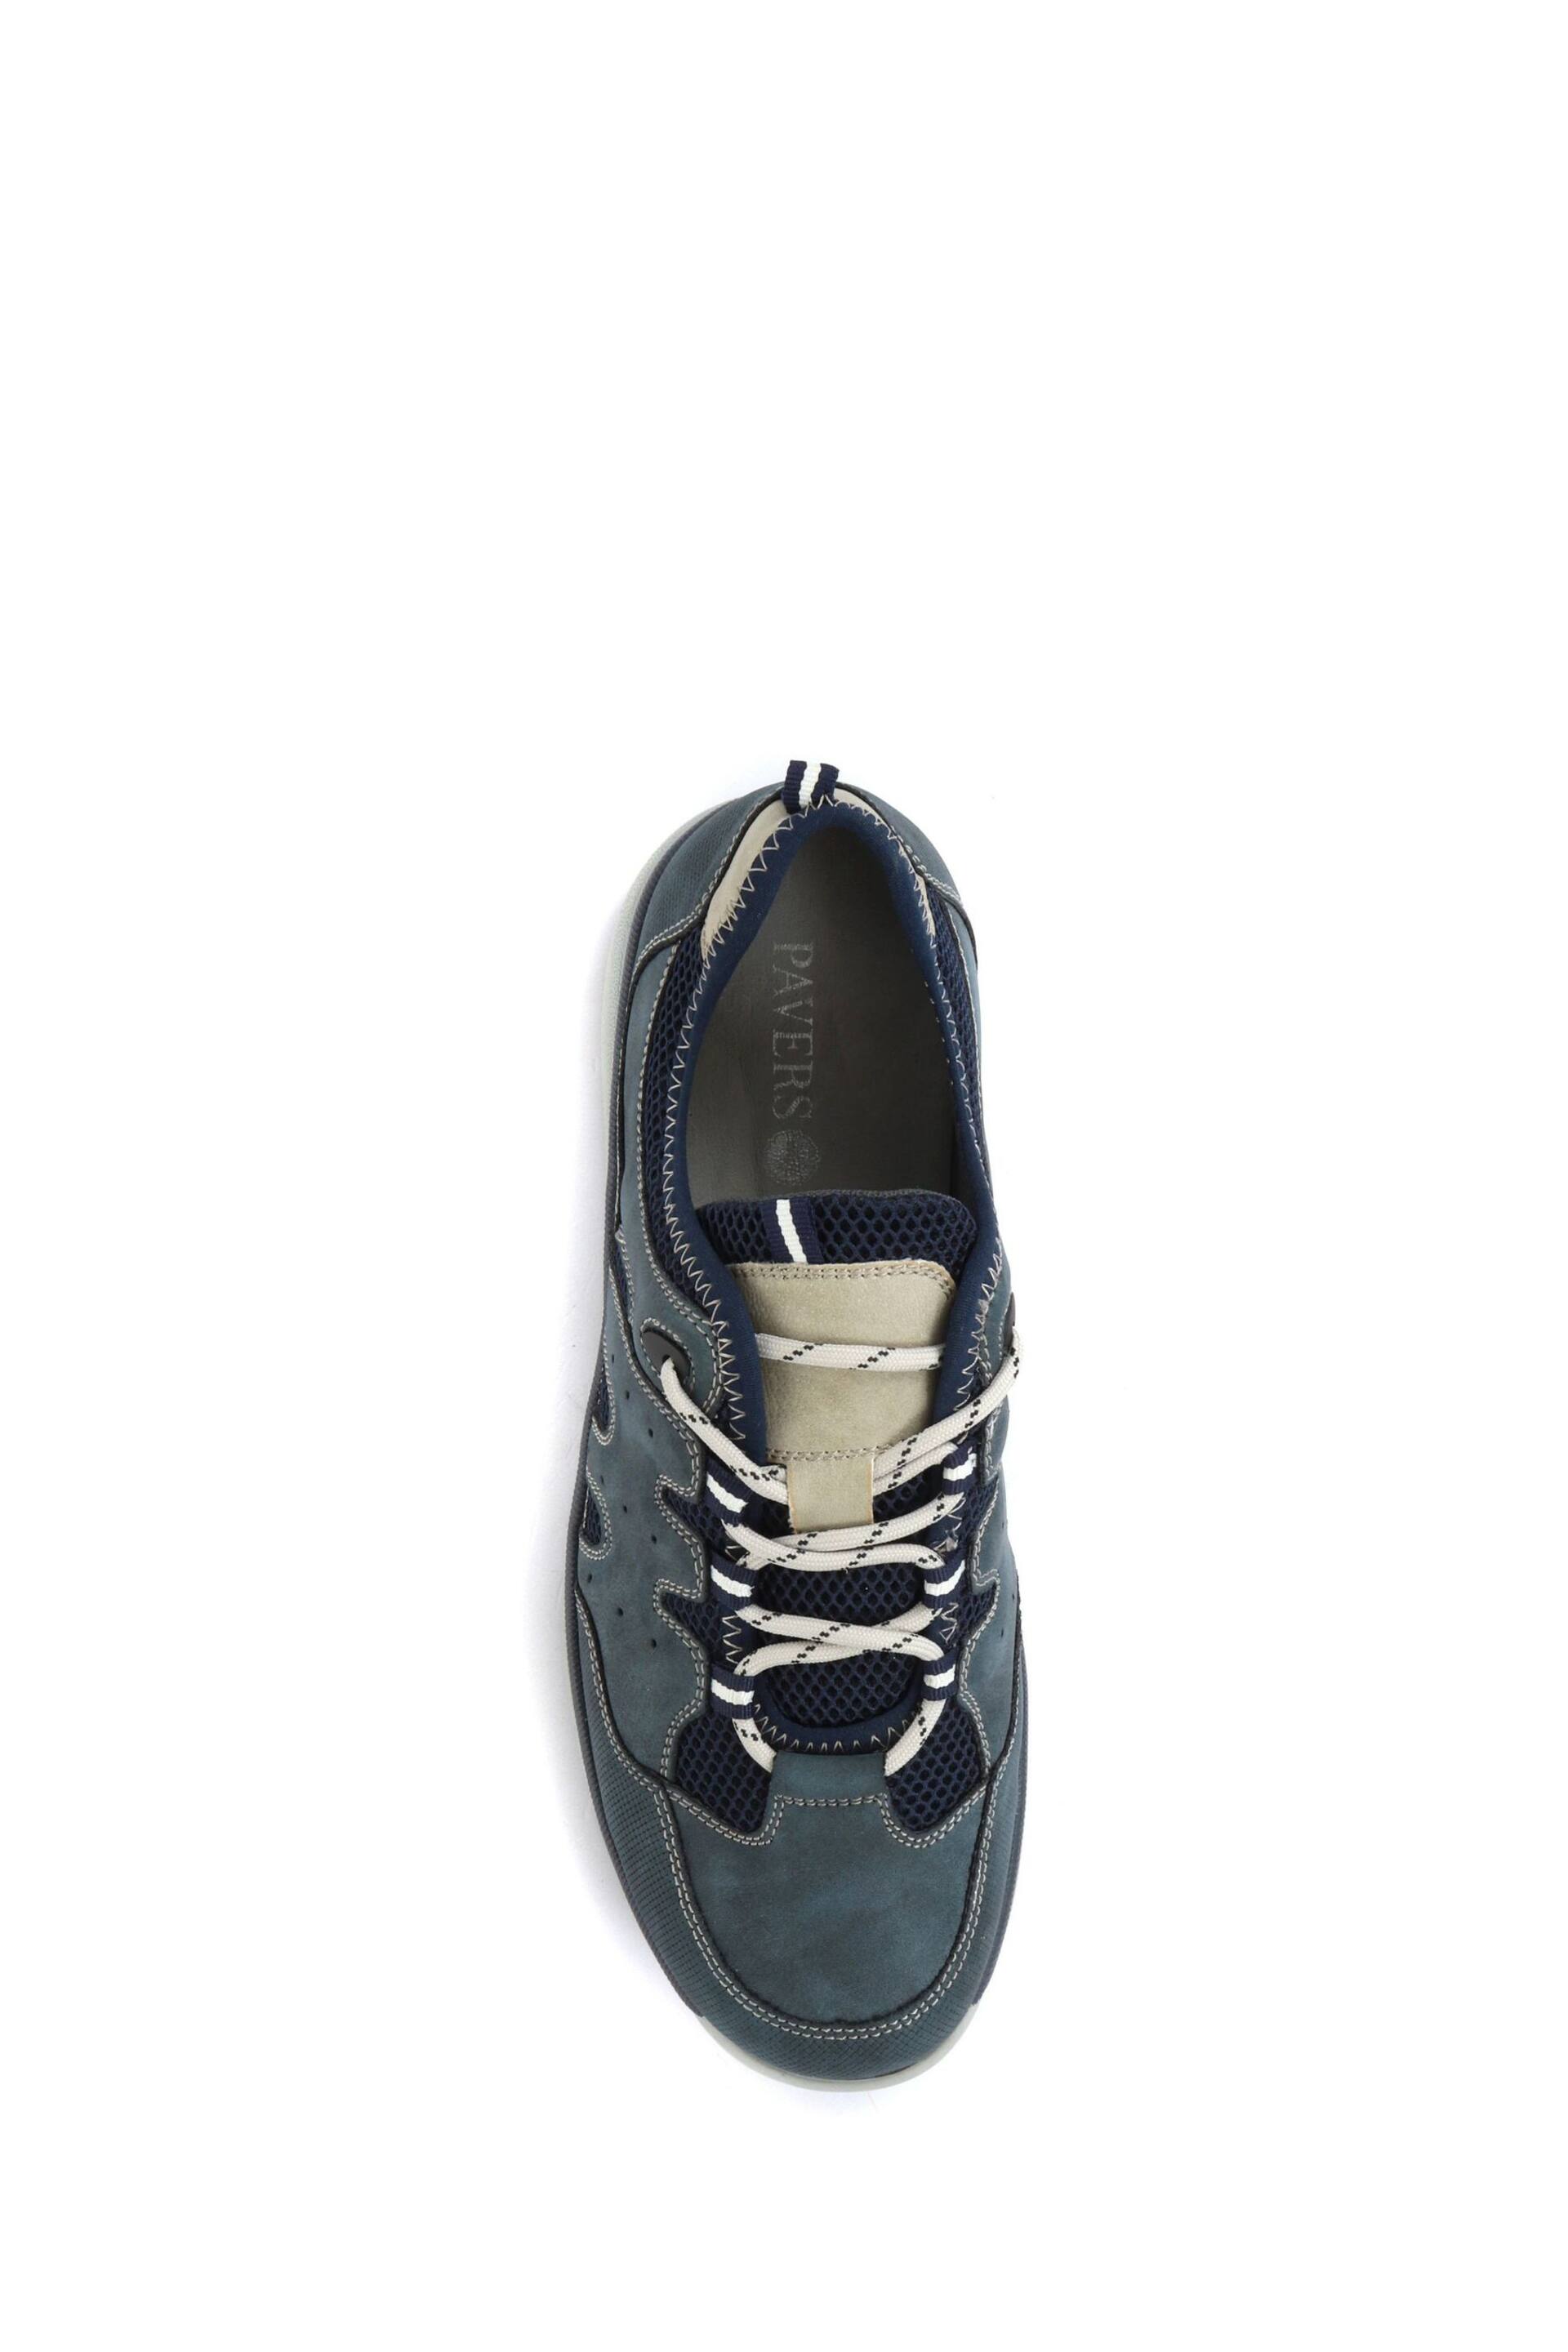 Pavers Blue Mens Wide Fit Lace-Up Trainers - Image 4 of 5